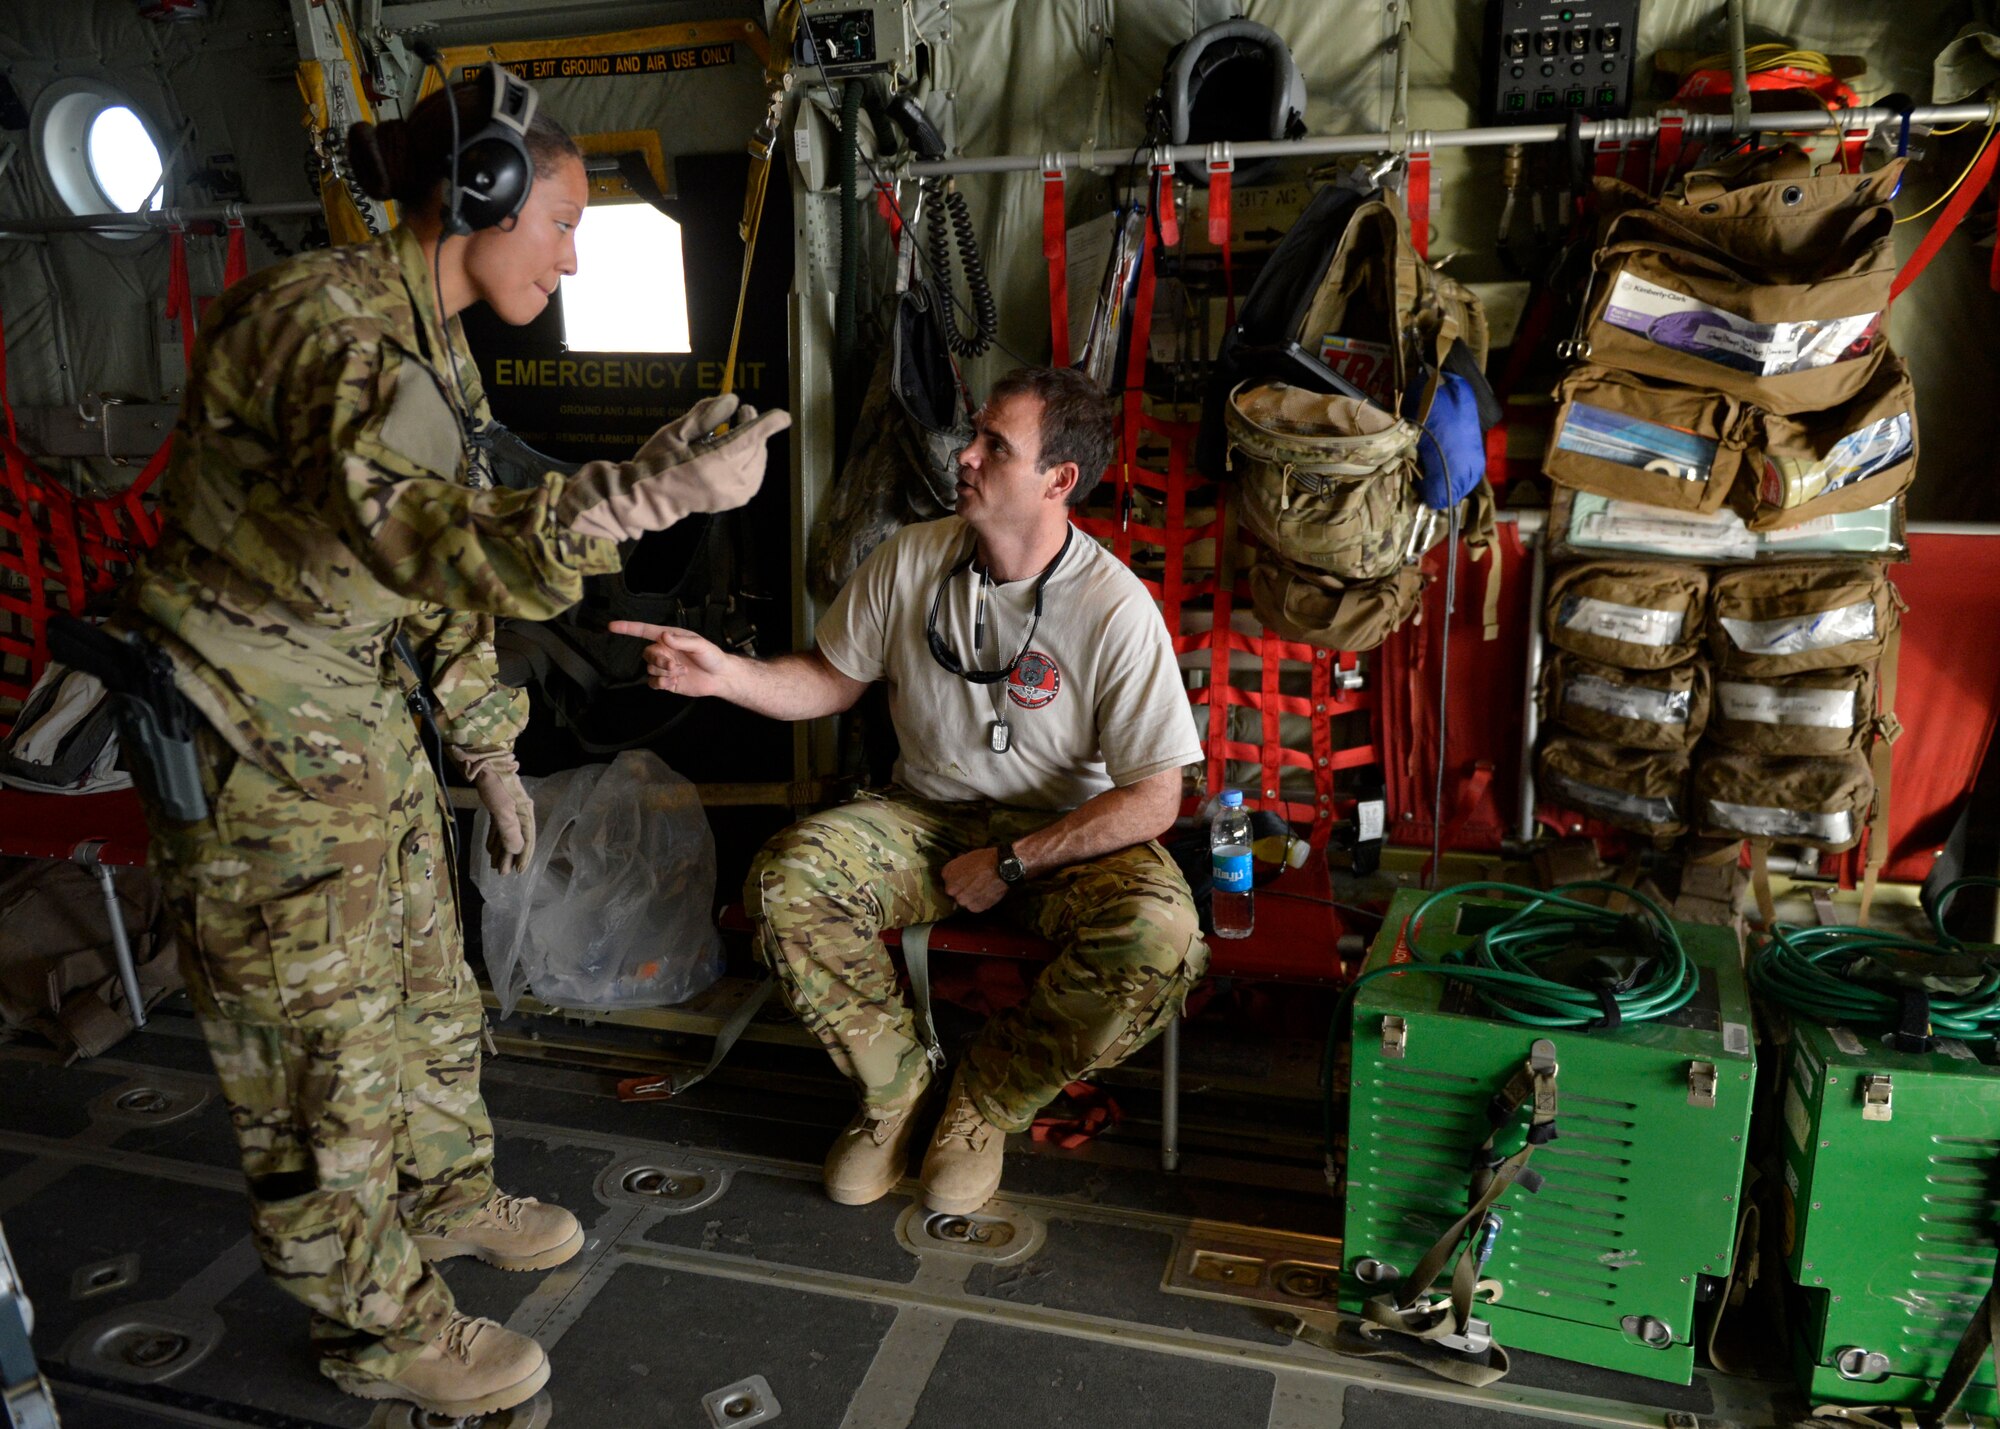 (From left) U.S. Air Force Capts. Cherry Fowler and Chad Moore, 455 Expeditionary Aeromedical Evacuation Squadron, discuss flight details during a aeromedical evacuation mission at Kandahar Airfield, Afghanistan May 29. The Aeromedical Evacuation squadron transports and treats ill and injured personnel throughout Afghanistan. Fowler is a flight nurse delpoyed from Peterson Air Force Base, Colo., and native of Watertown South Dakota. Moore is a Critical Care Air Transport Team nurse deployed from Wright-Patterson Air Force Base, and a native of New Brockton, Alaska (Air Force photo). 